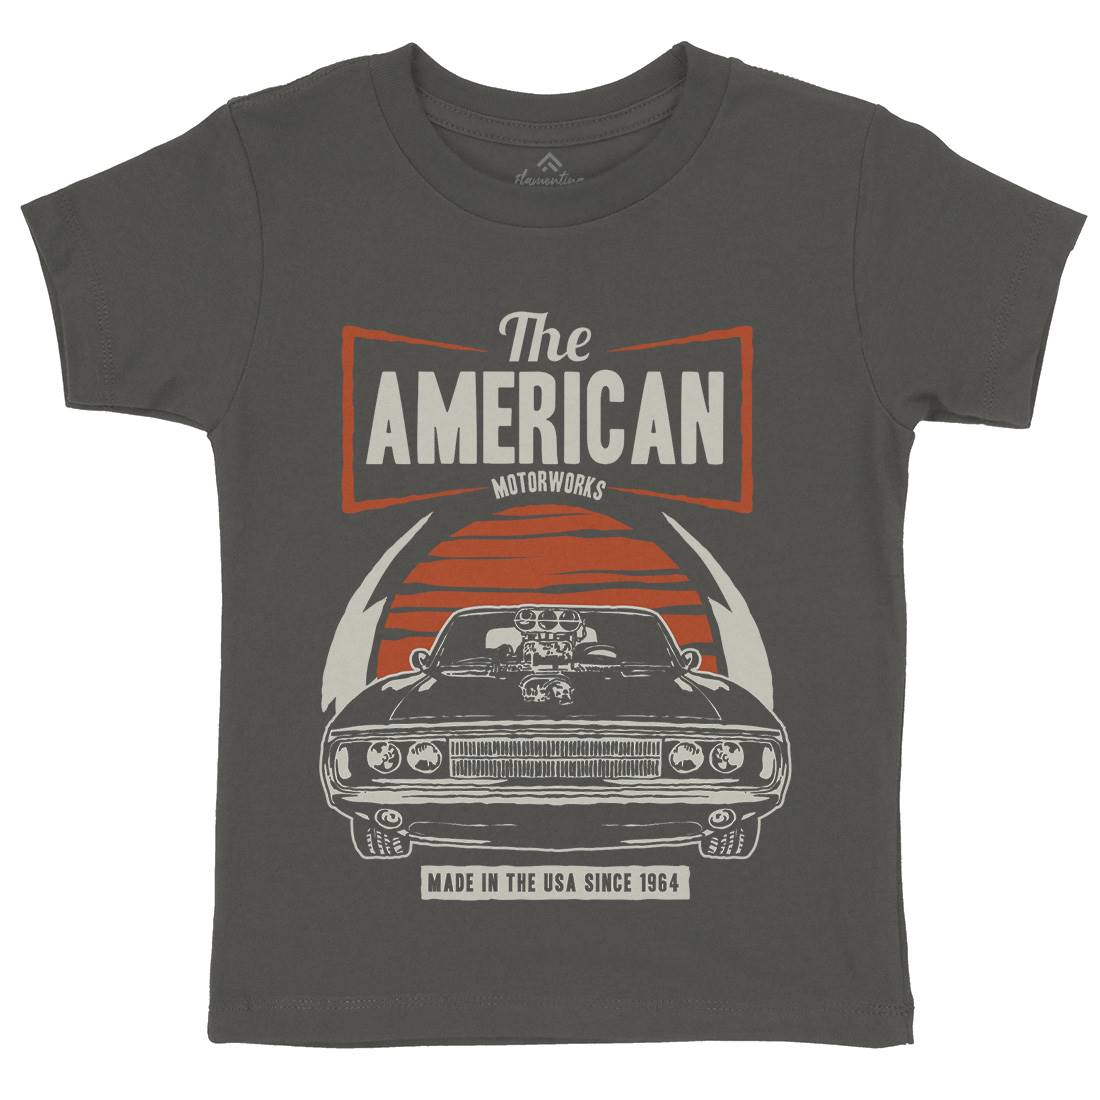 American Muscle Car Kids Crew Neck T-Shirt Cars A401